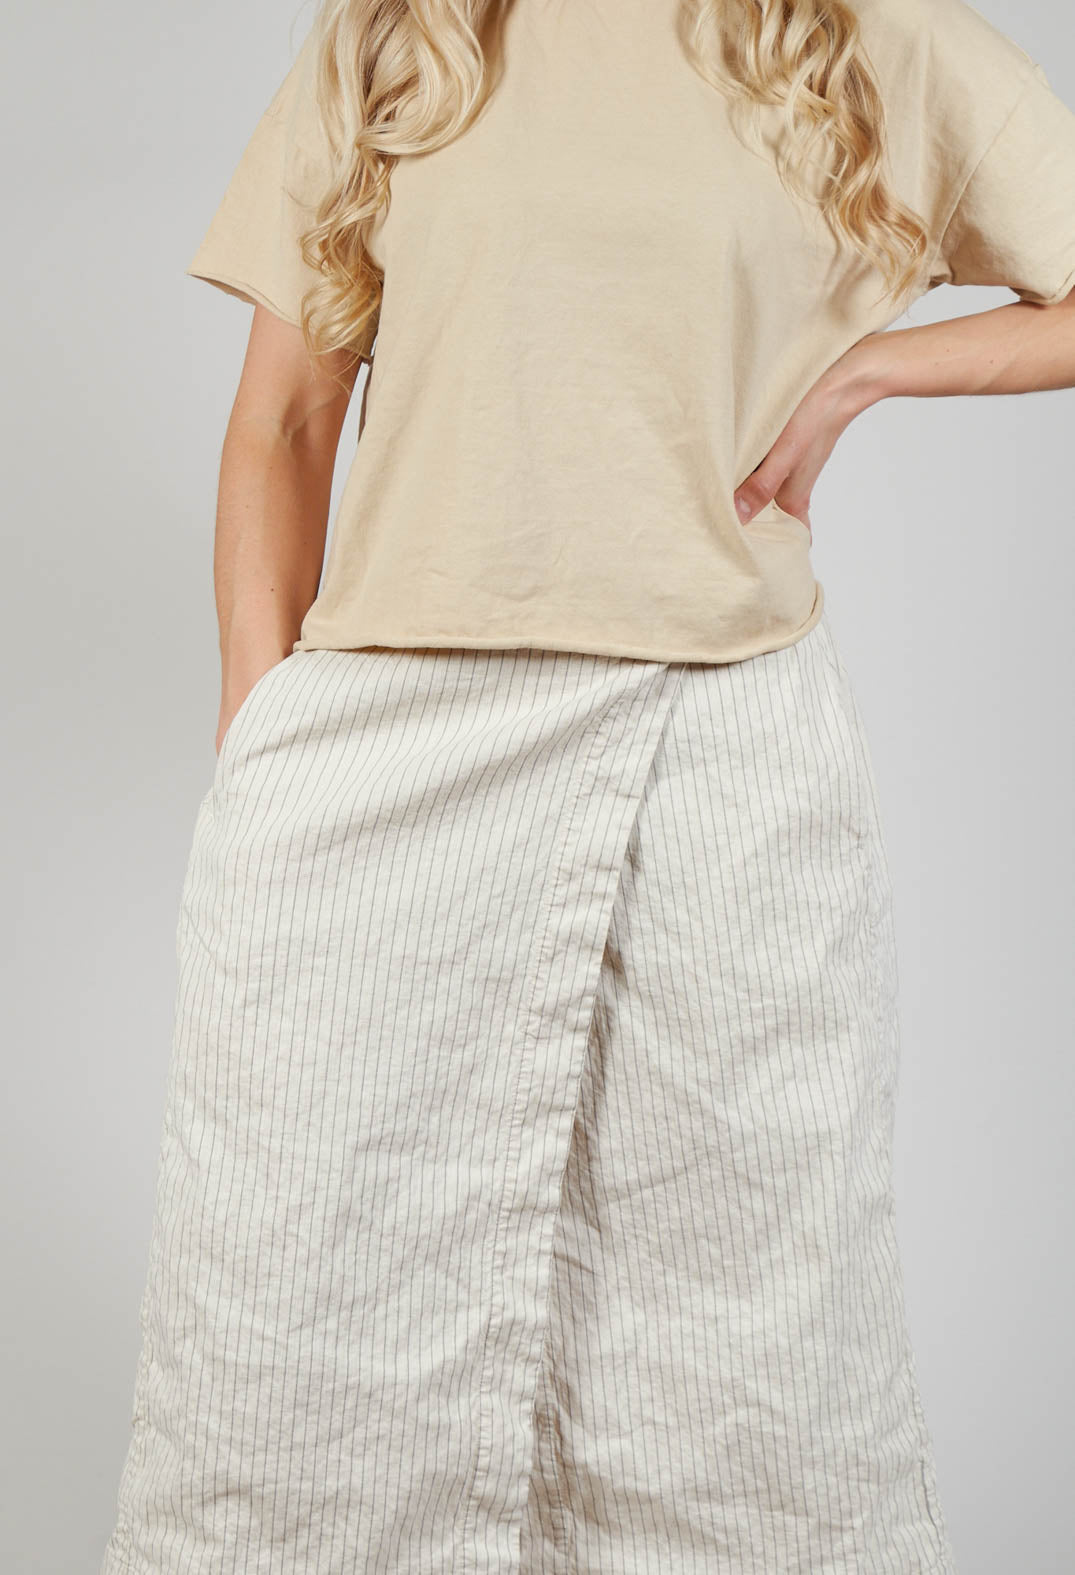 Pinstriped Wrap Skirt in Natural